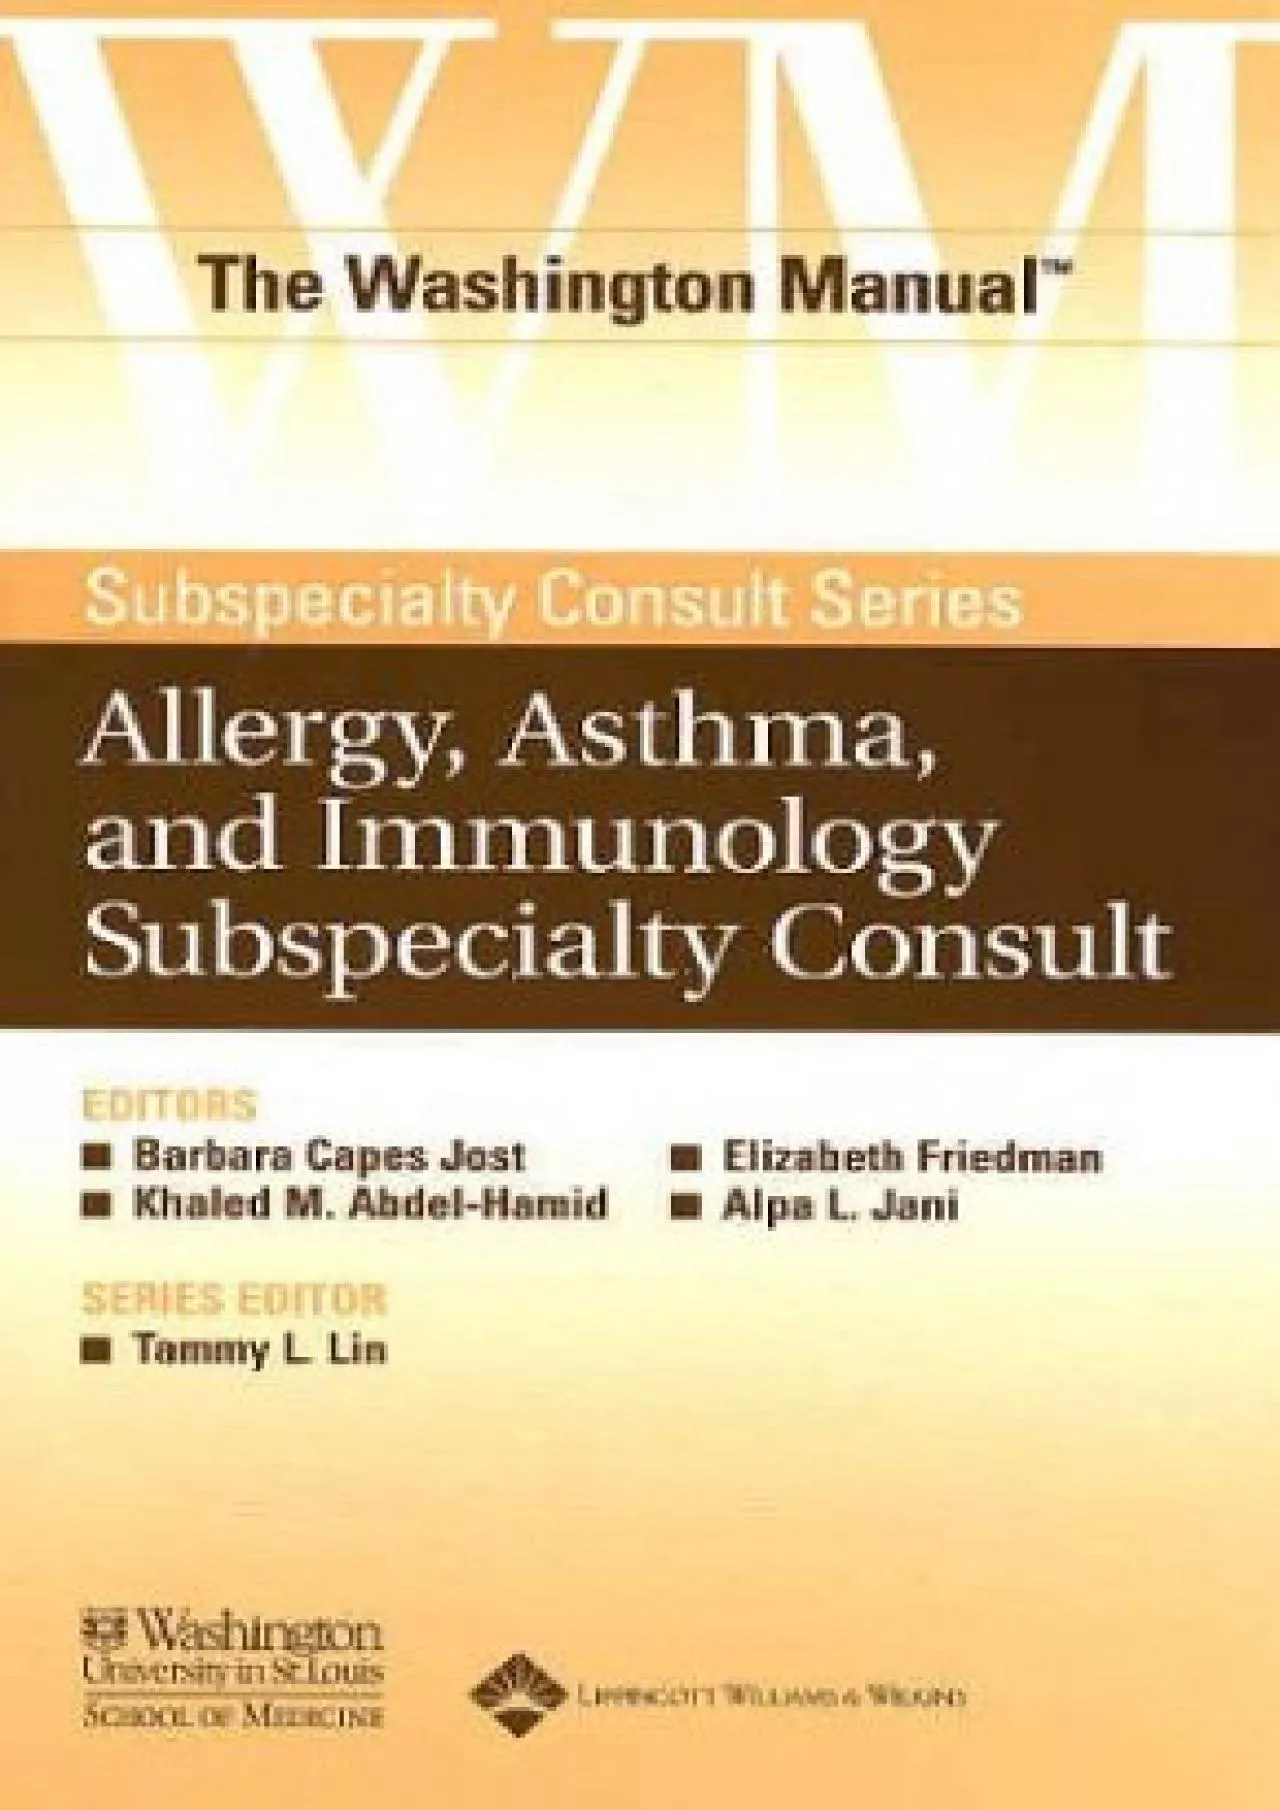 (EBOOK)-The Washington Manual Allergy, Asthma, and Immunology Subspecialty Consult